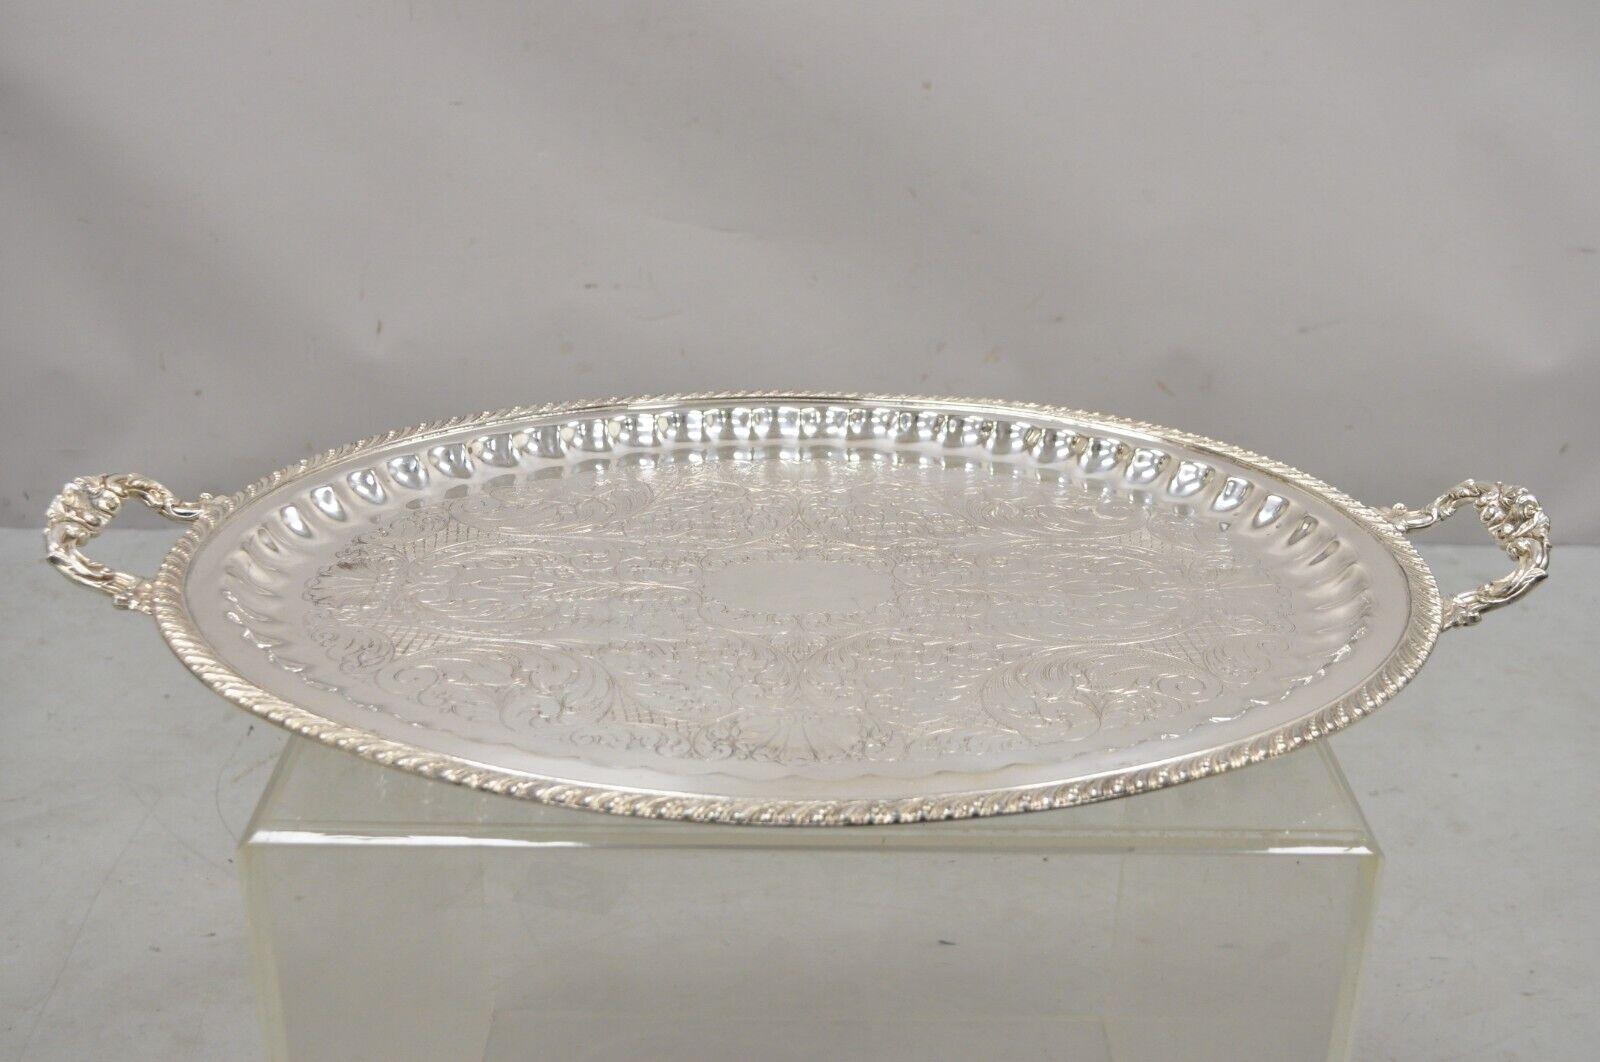 Antique JLS EPC silver plated regency style ornate oval serving platter tray. Item features an oval form, ornate twin handles, scrollwork etched center, original stamp, very nice antique item. Circa early to mid 20th century. Measurements: 2